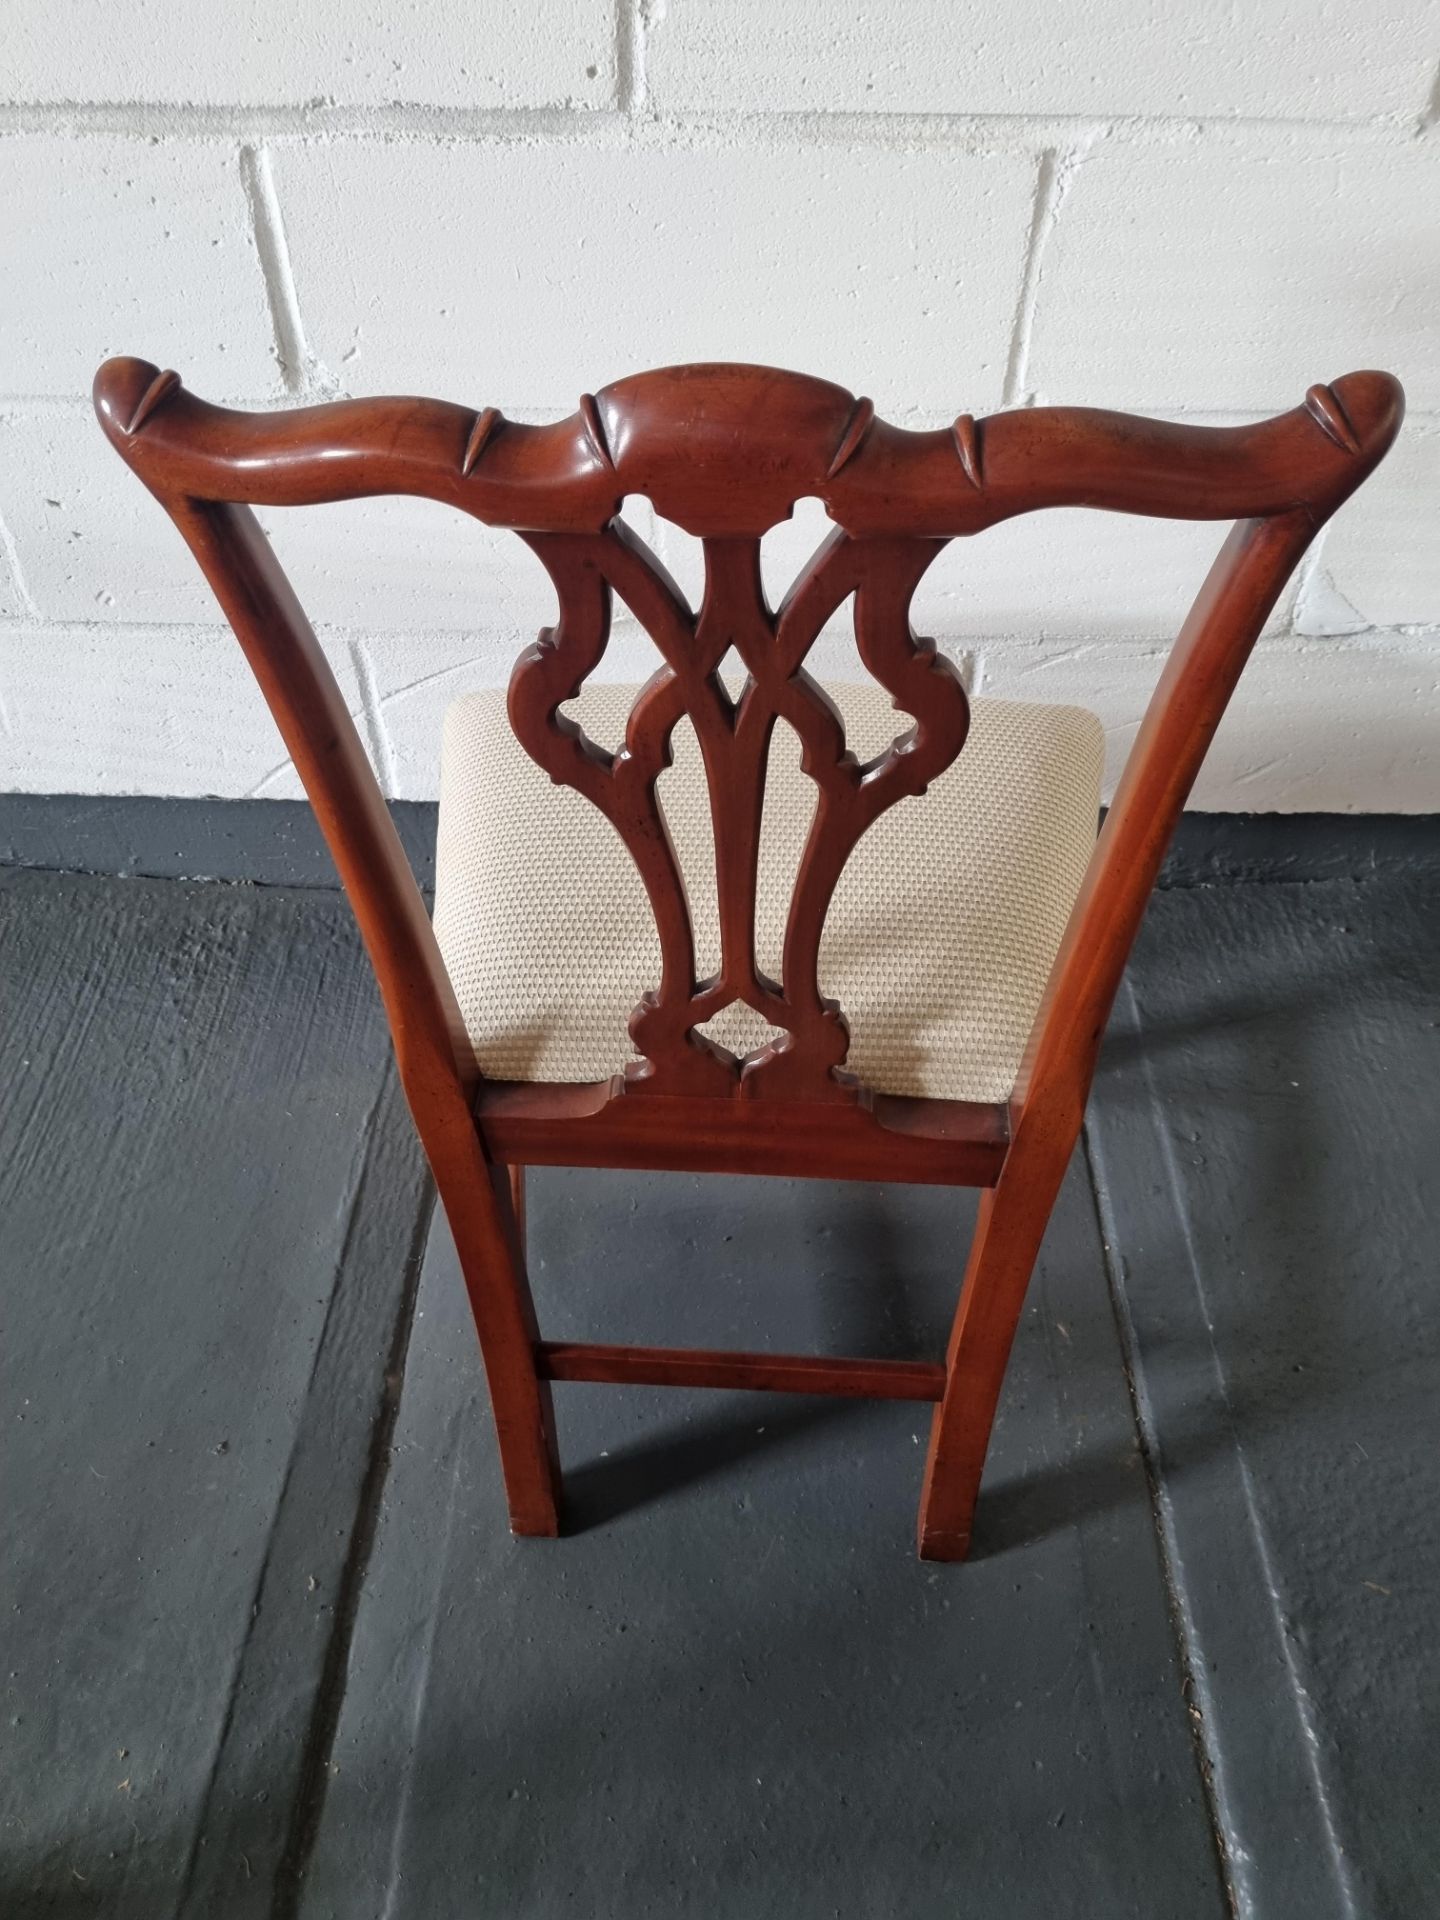 Arthur Brett Georgian-Style Dining Side Chair With Bespoke Cream Upholstery Beautifully Proportioned - Image 2 of 5